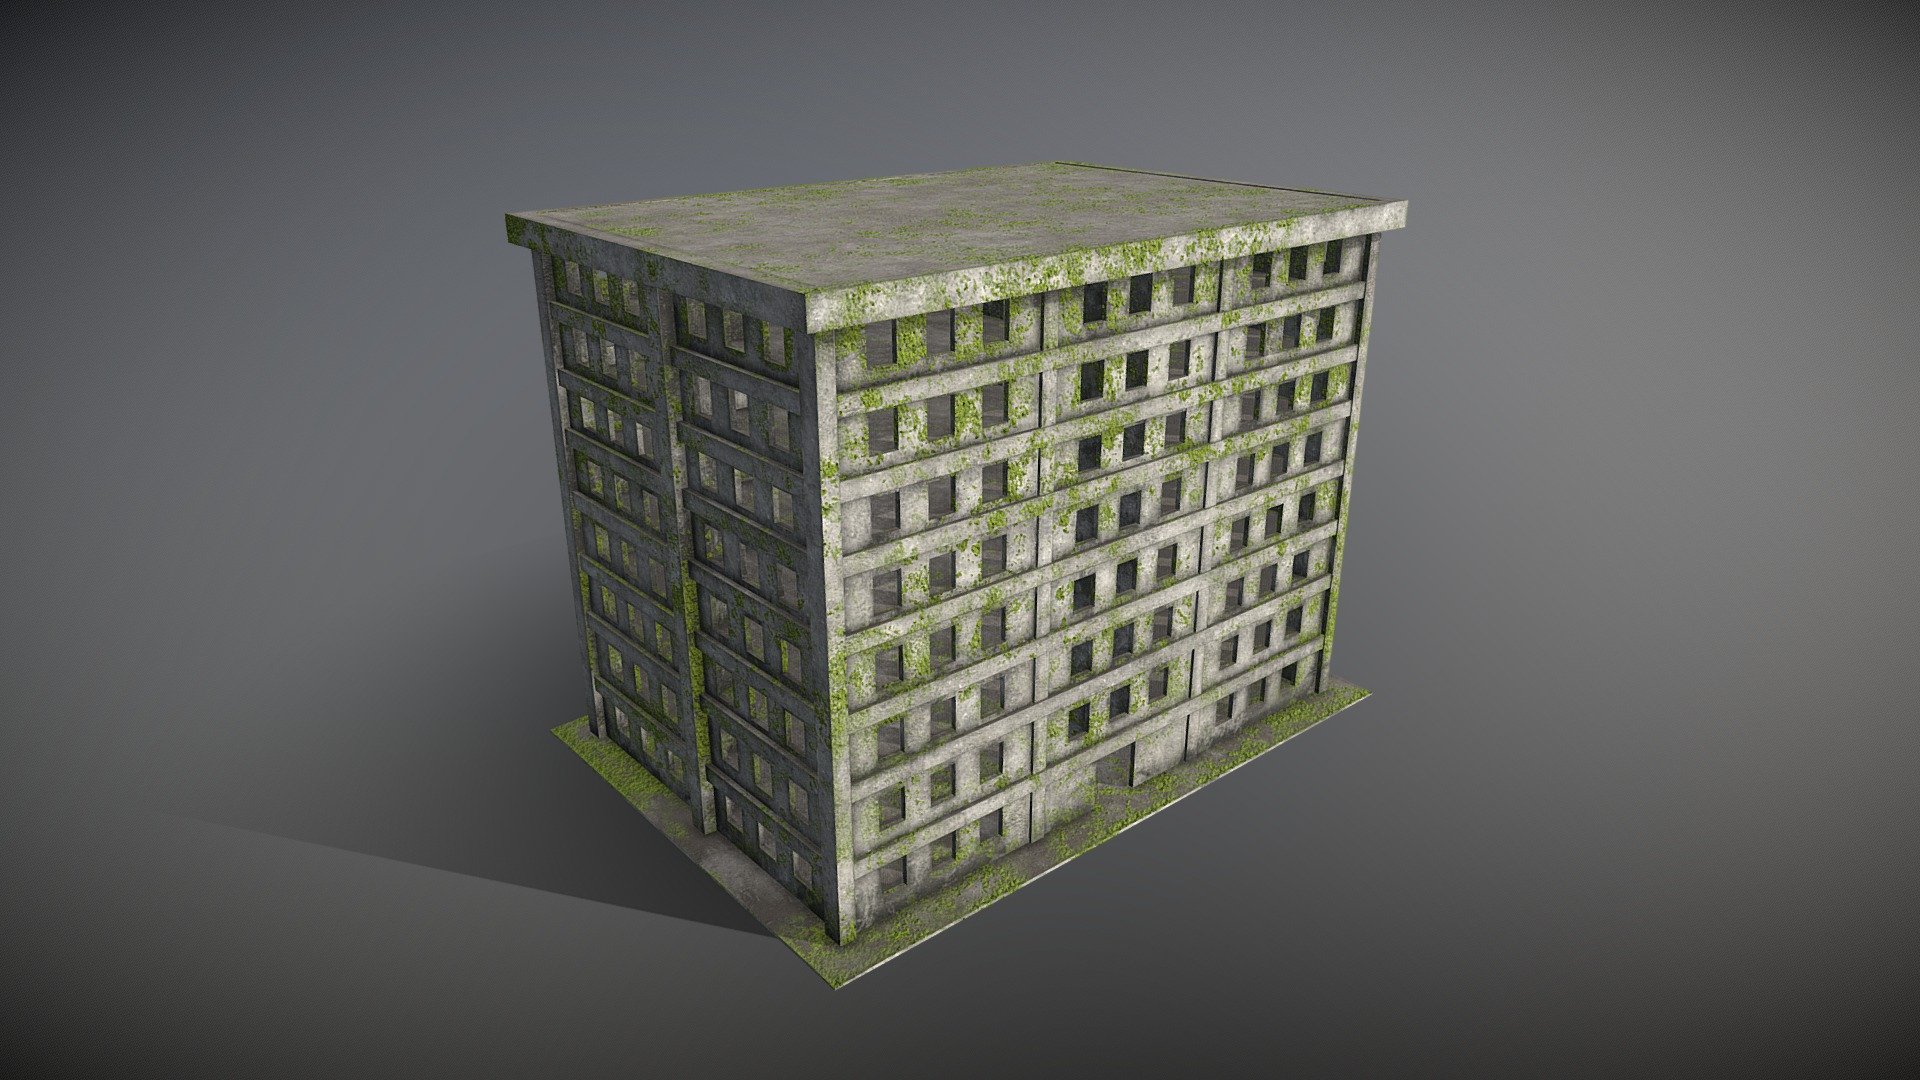 Enterable Skyscraper with stairs inside, 4096 pbr material with dx normalmap 3d model